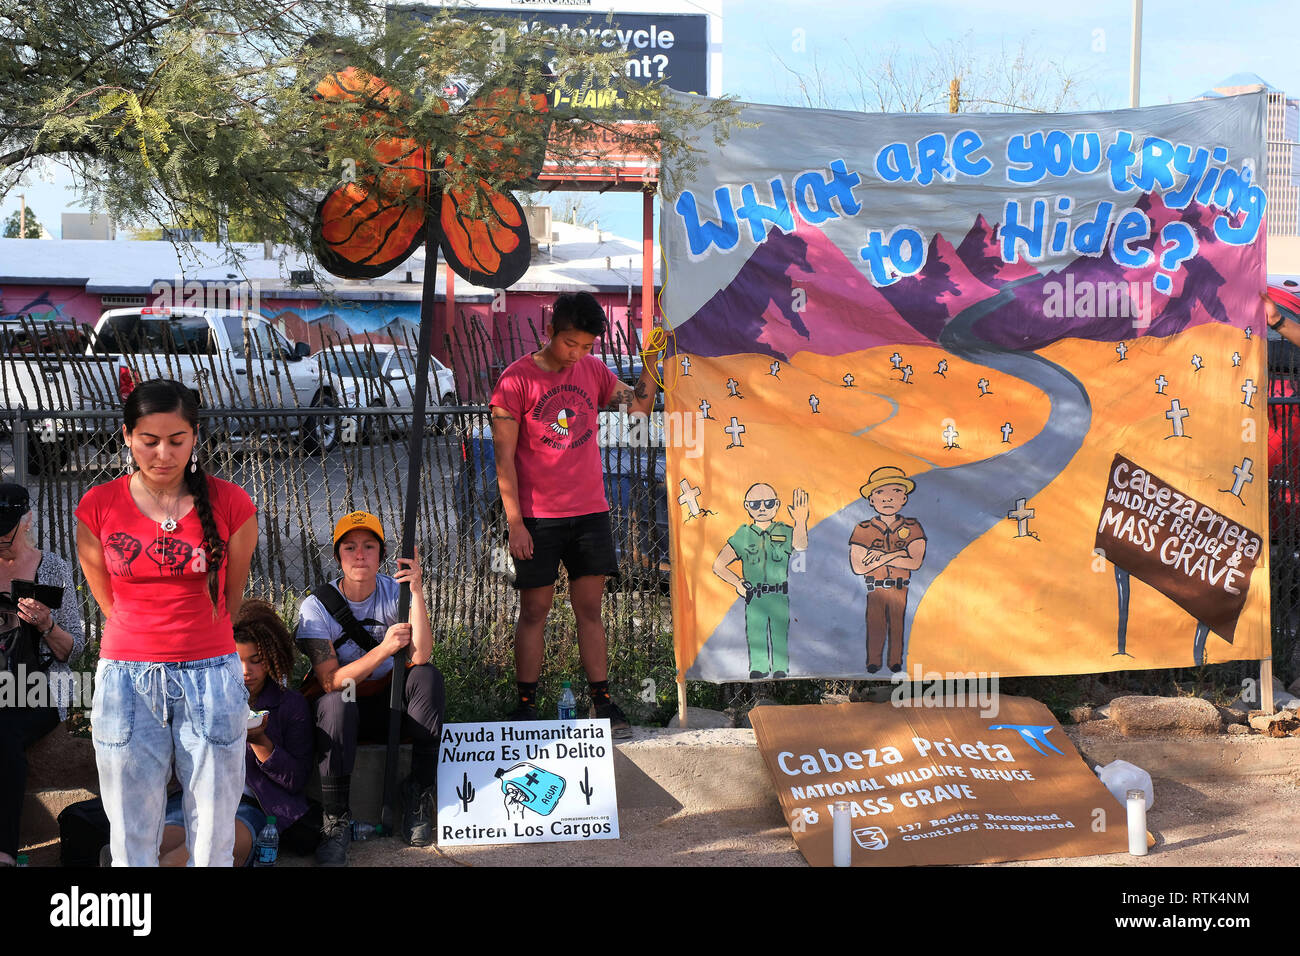 Tucson, Arizona, USA. 1st Mar, 2019. March 1, 2019- Members of No More Deaths hold vigil in Tucson after the sentencing in Federal Court of 4 members of the group who left water on Federal lands for migrants who crossed the border illegally into Arizona. They were arrested for trespassing and found guilty of misdemeanor charges. They didn't receive jail time but instead got probation and ordered to pay a fine. The group held a march through Tucson and carried symbolic water jugs similar to the ones they left in the wildlife refuge. They later lit candles to honor migrants who had died cros Stock Photo